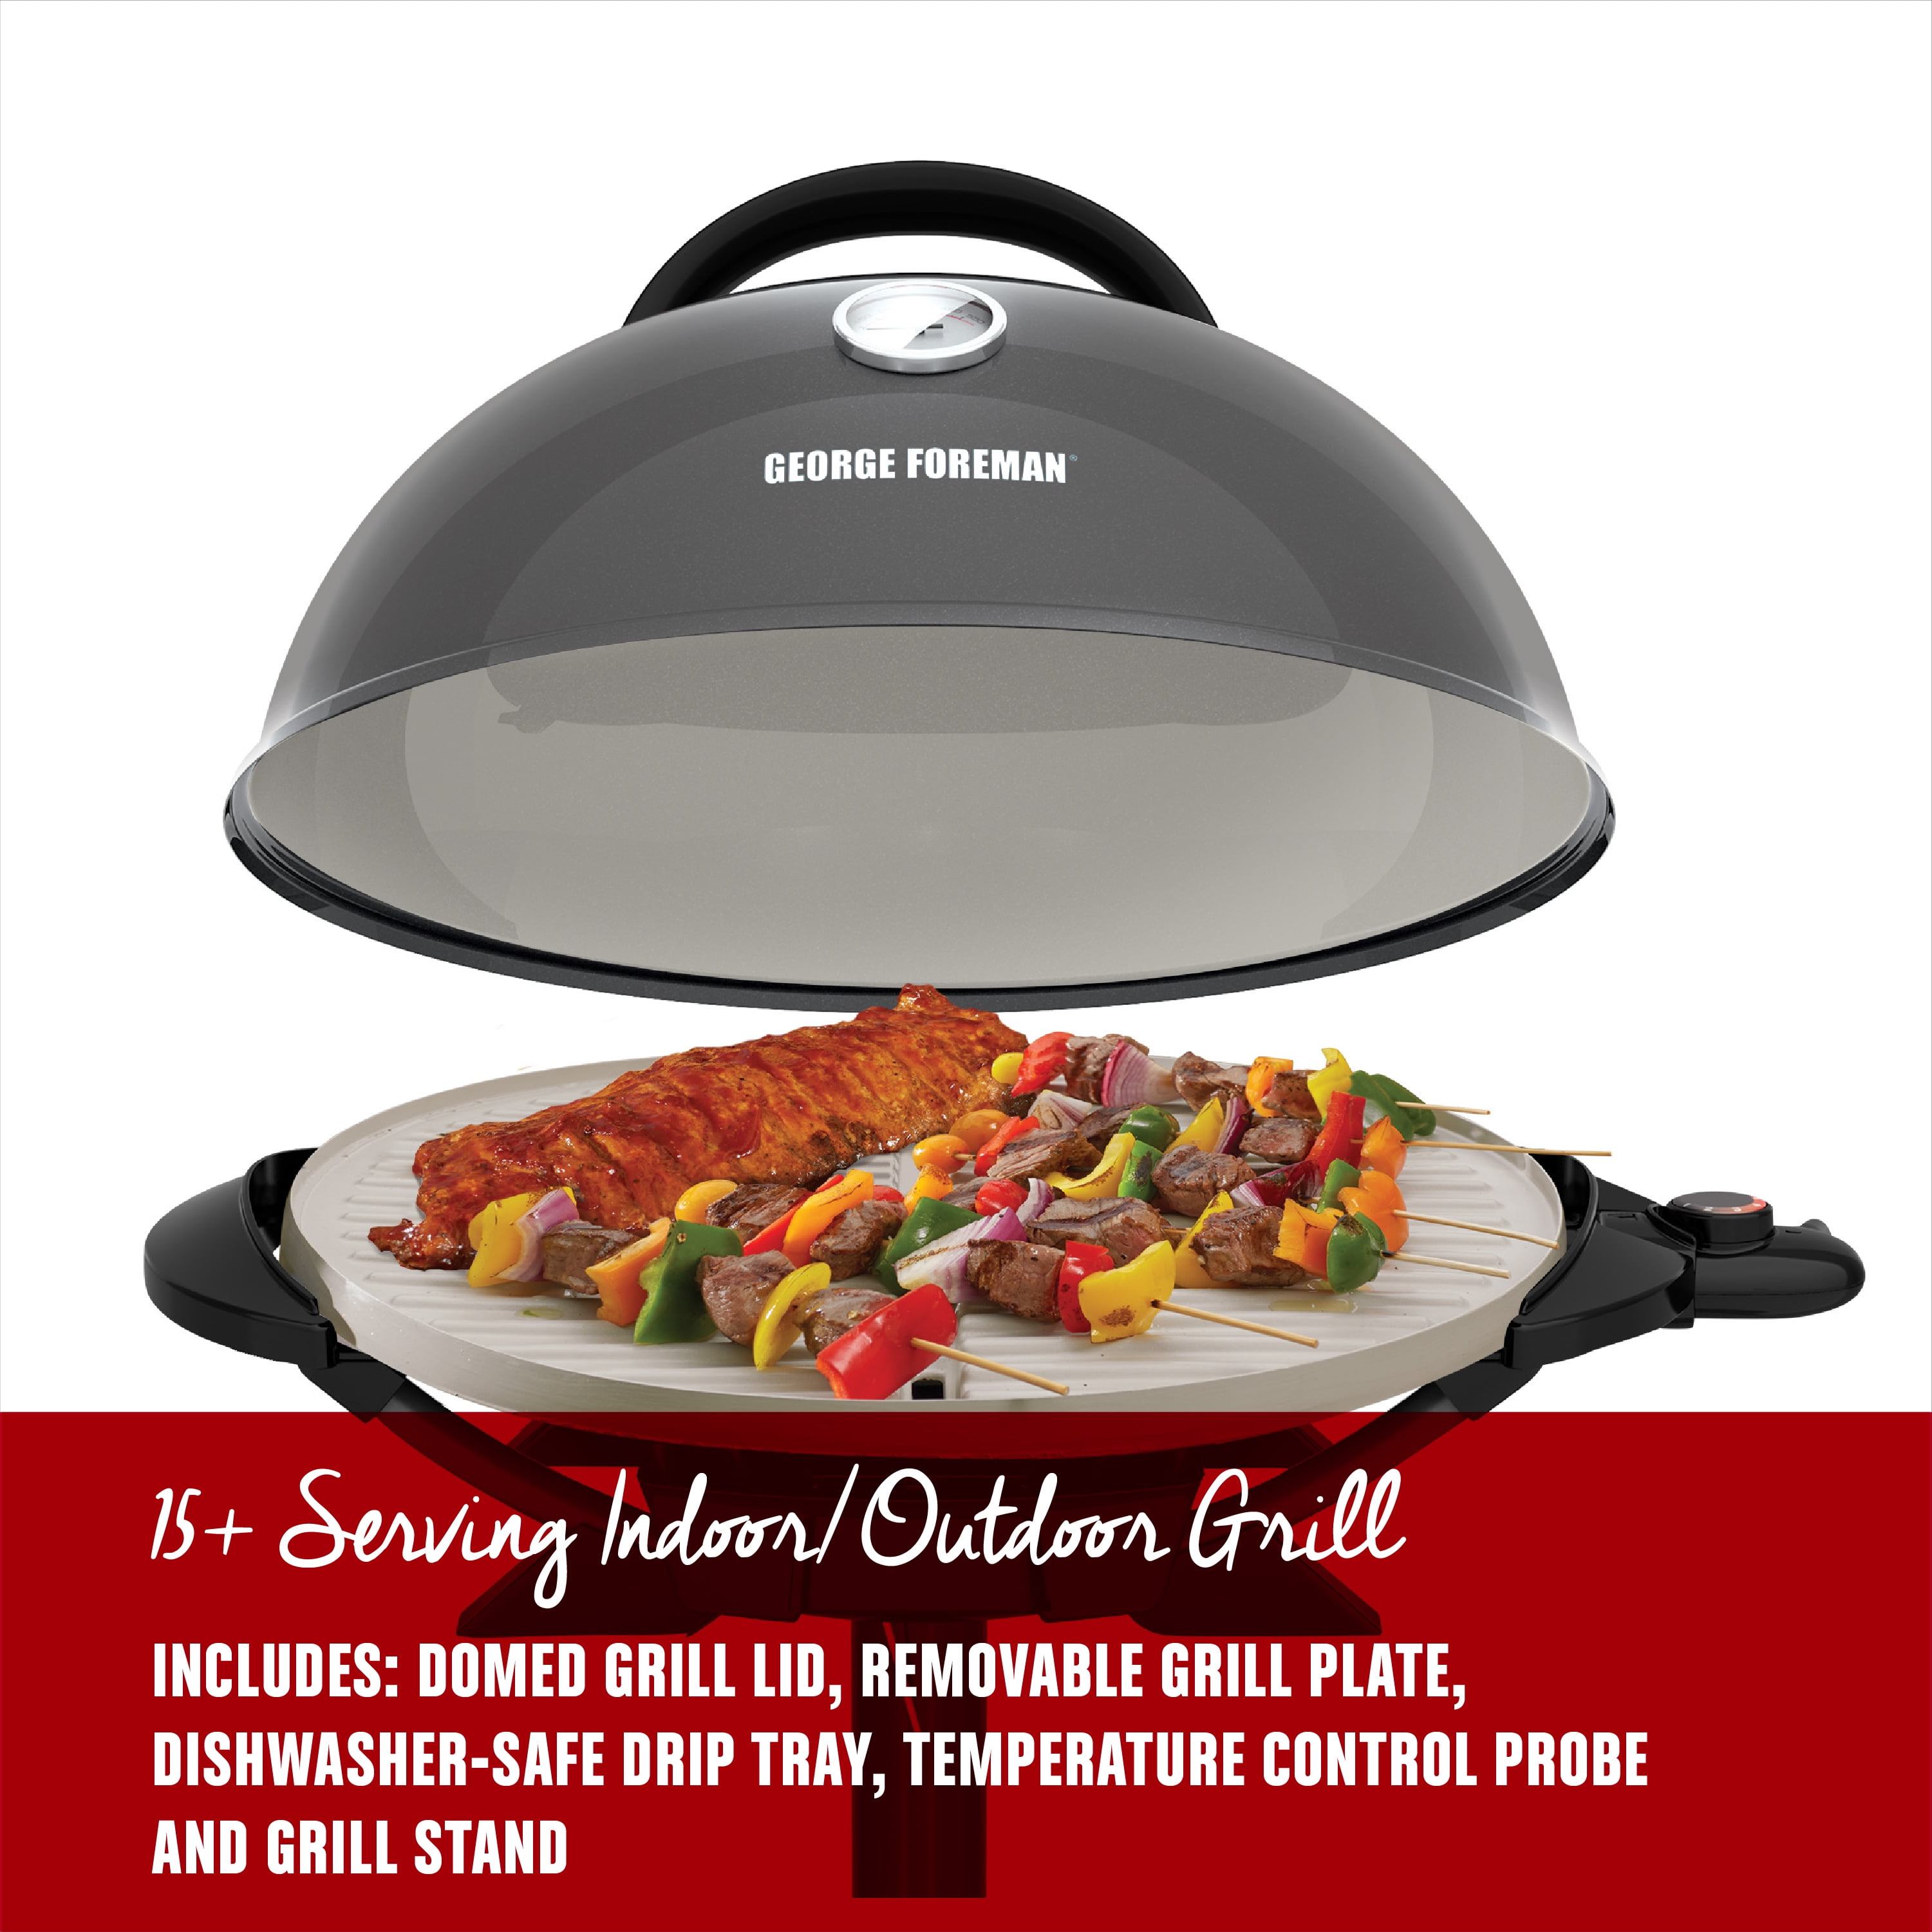 George Foreman 15+ Serving Indoor / Outdoor Electric Grill with Ceramic Plates, Gun Metal, GFO3320GM - 1